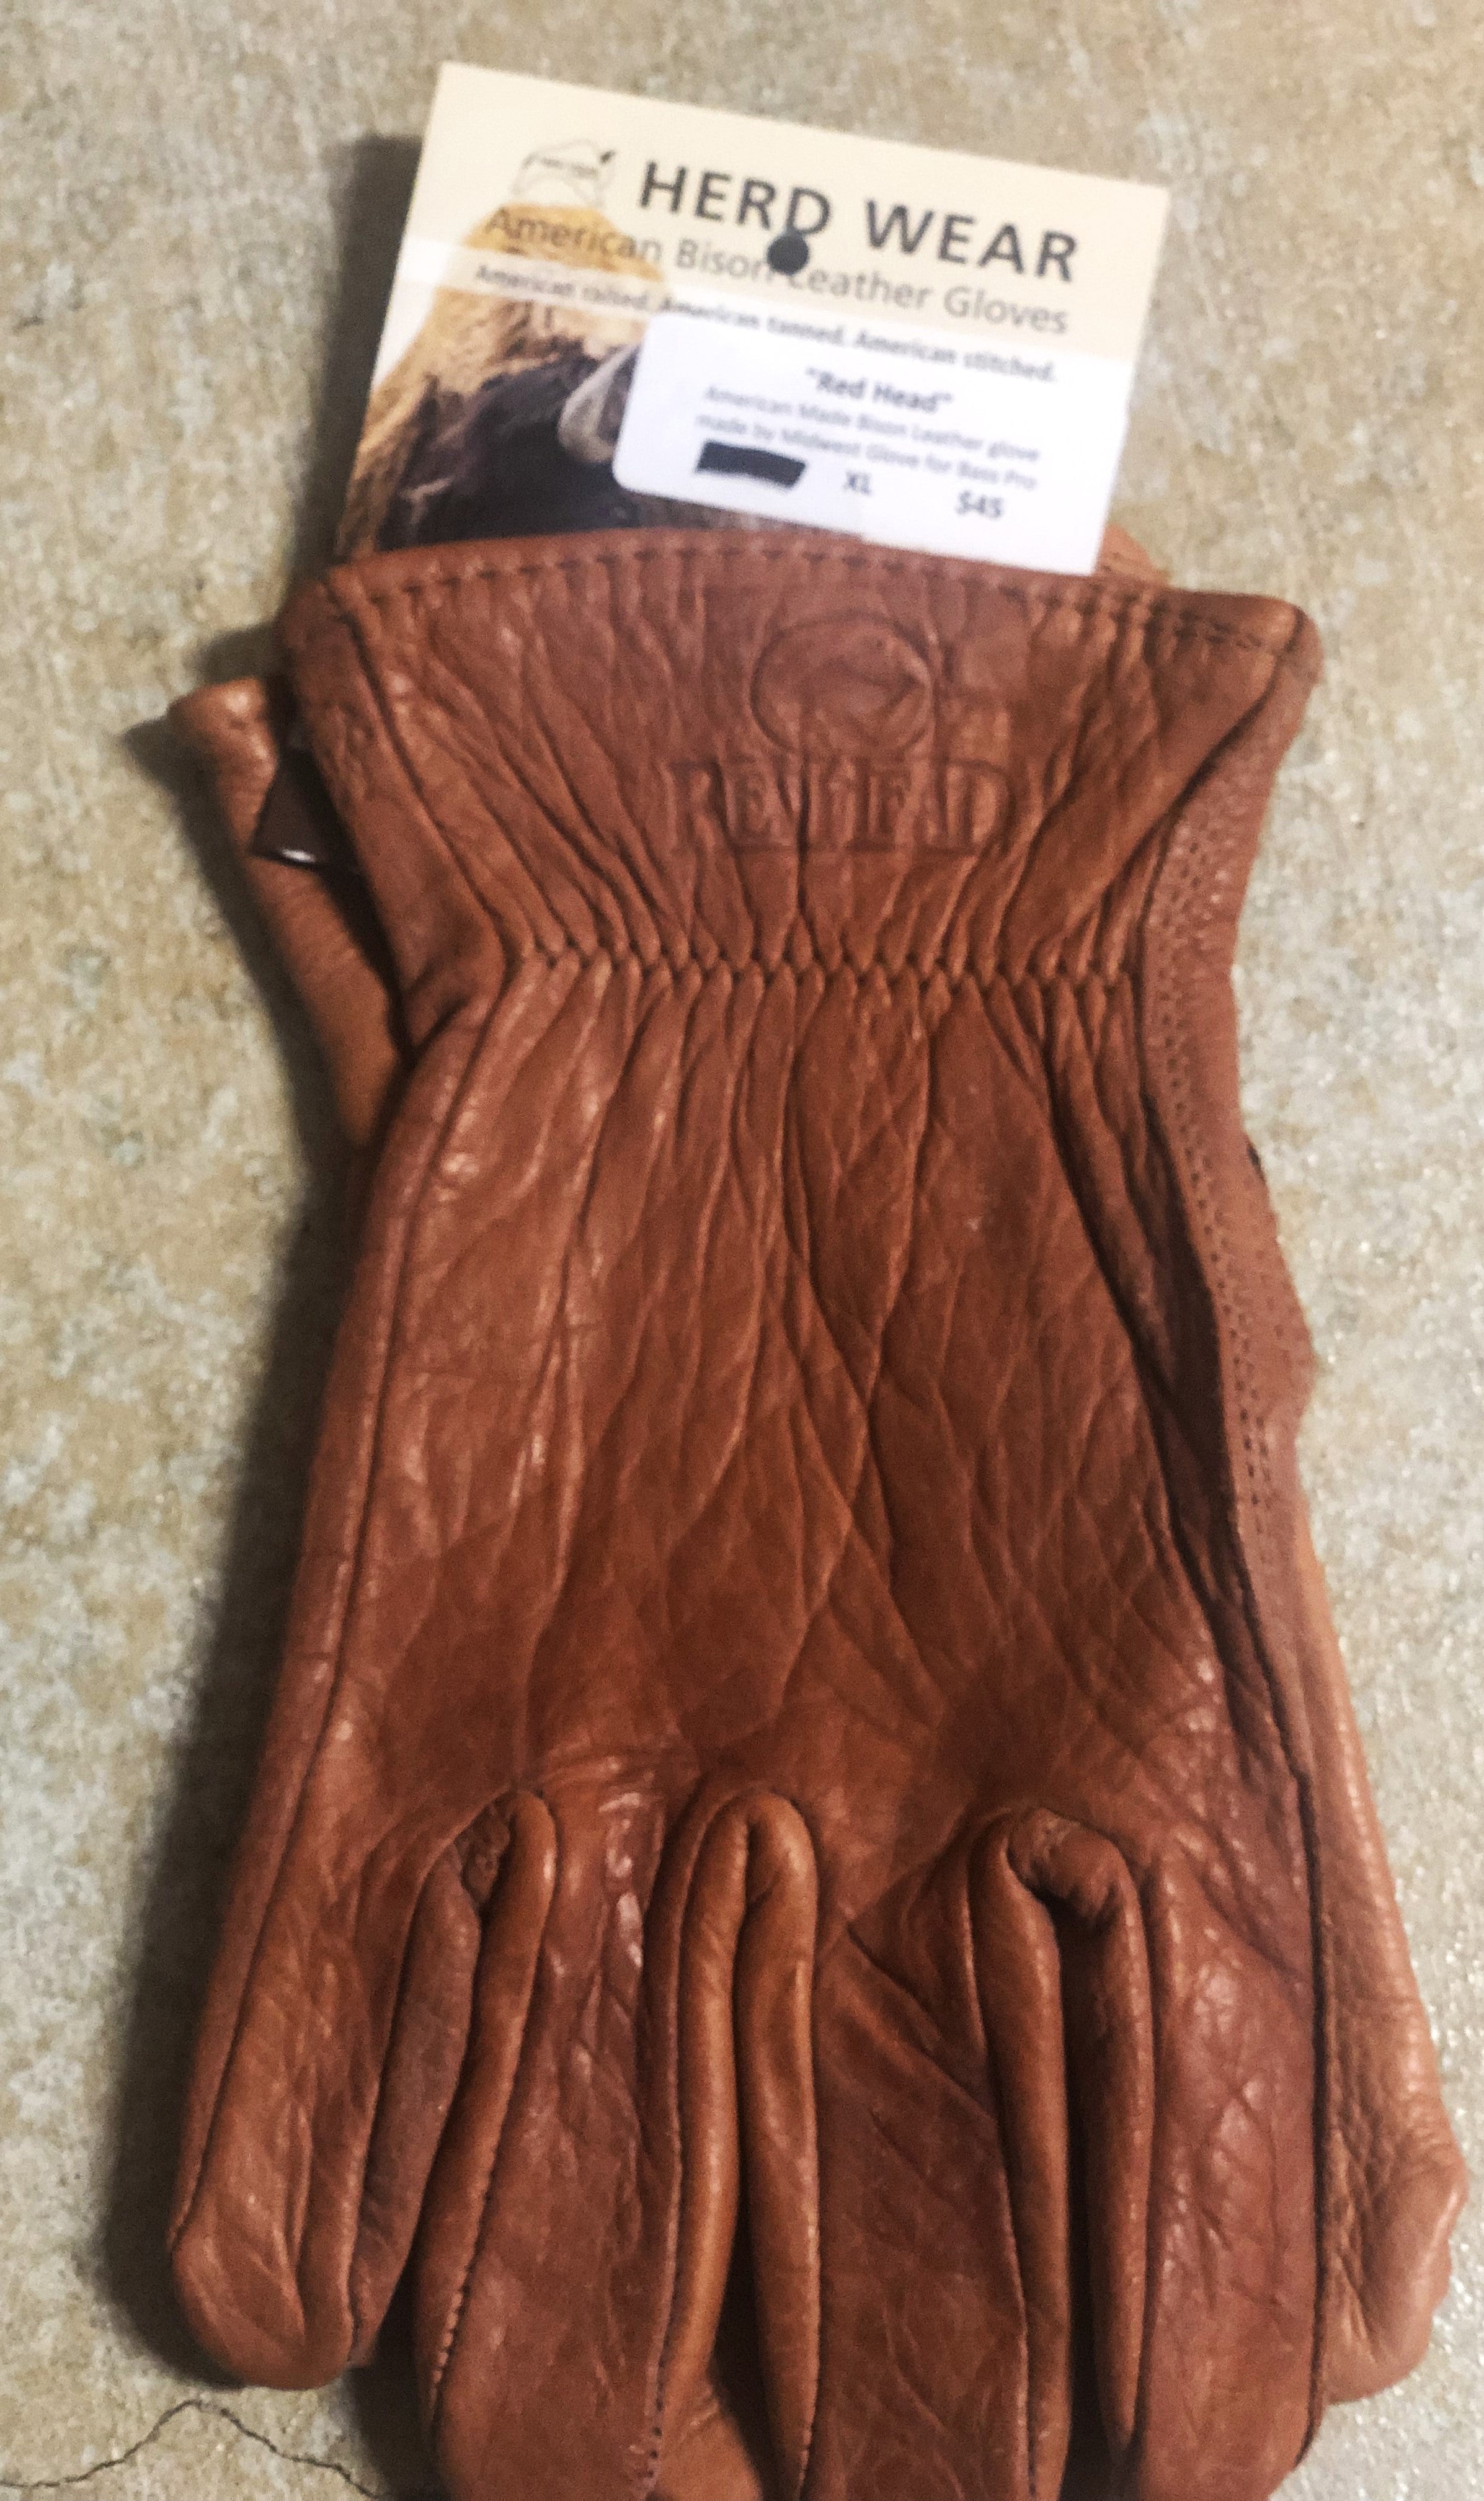 Leather Can Koozie , Rugged Bison